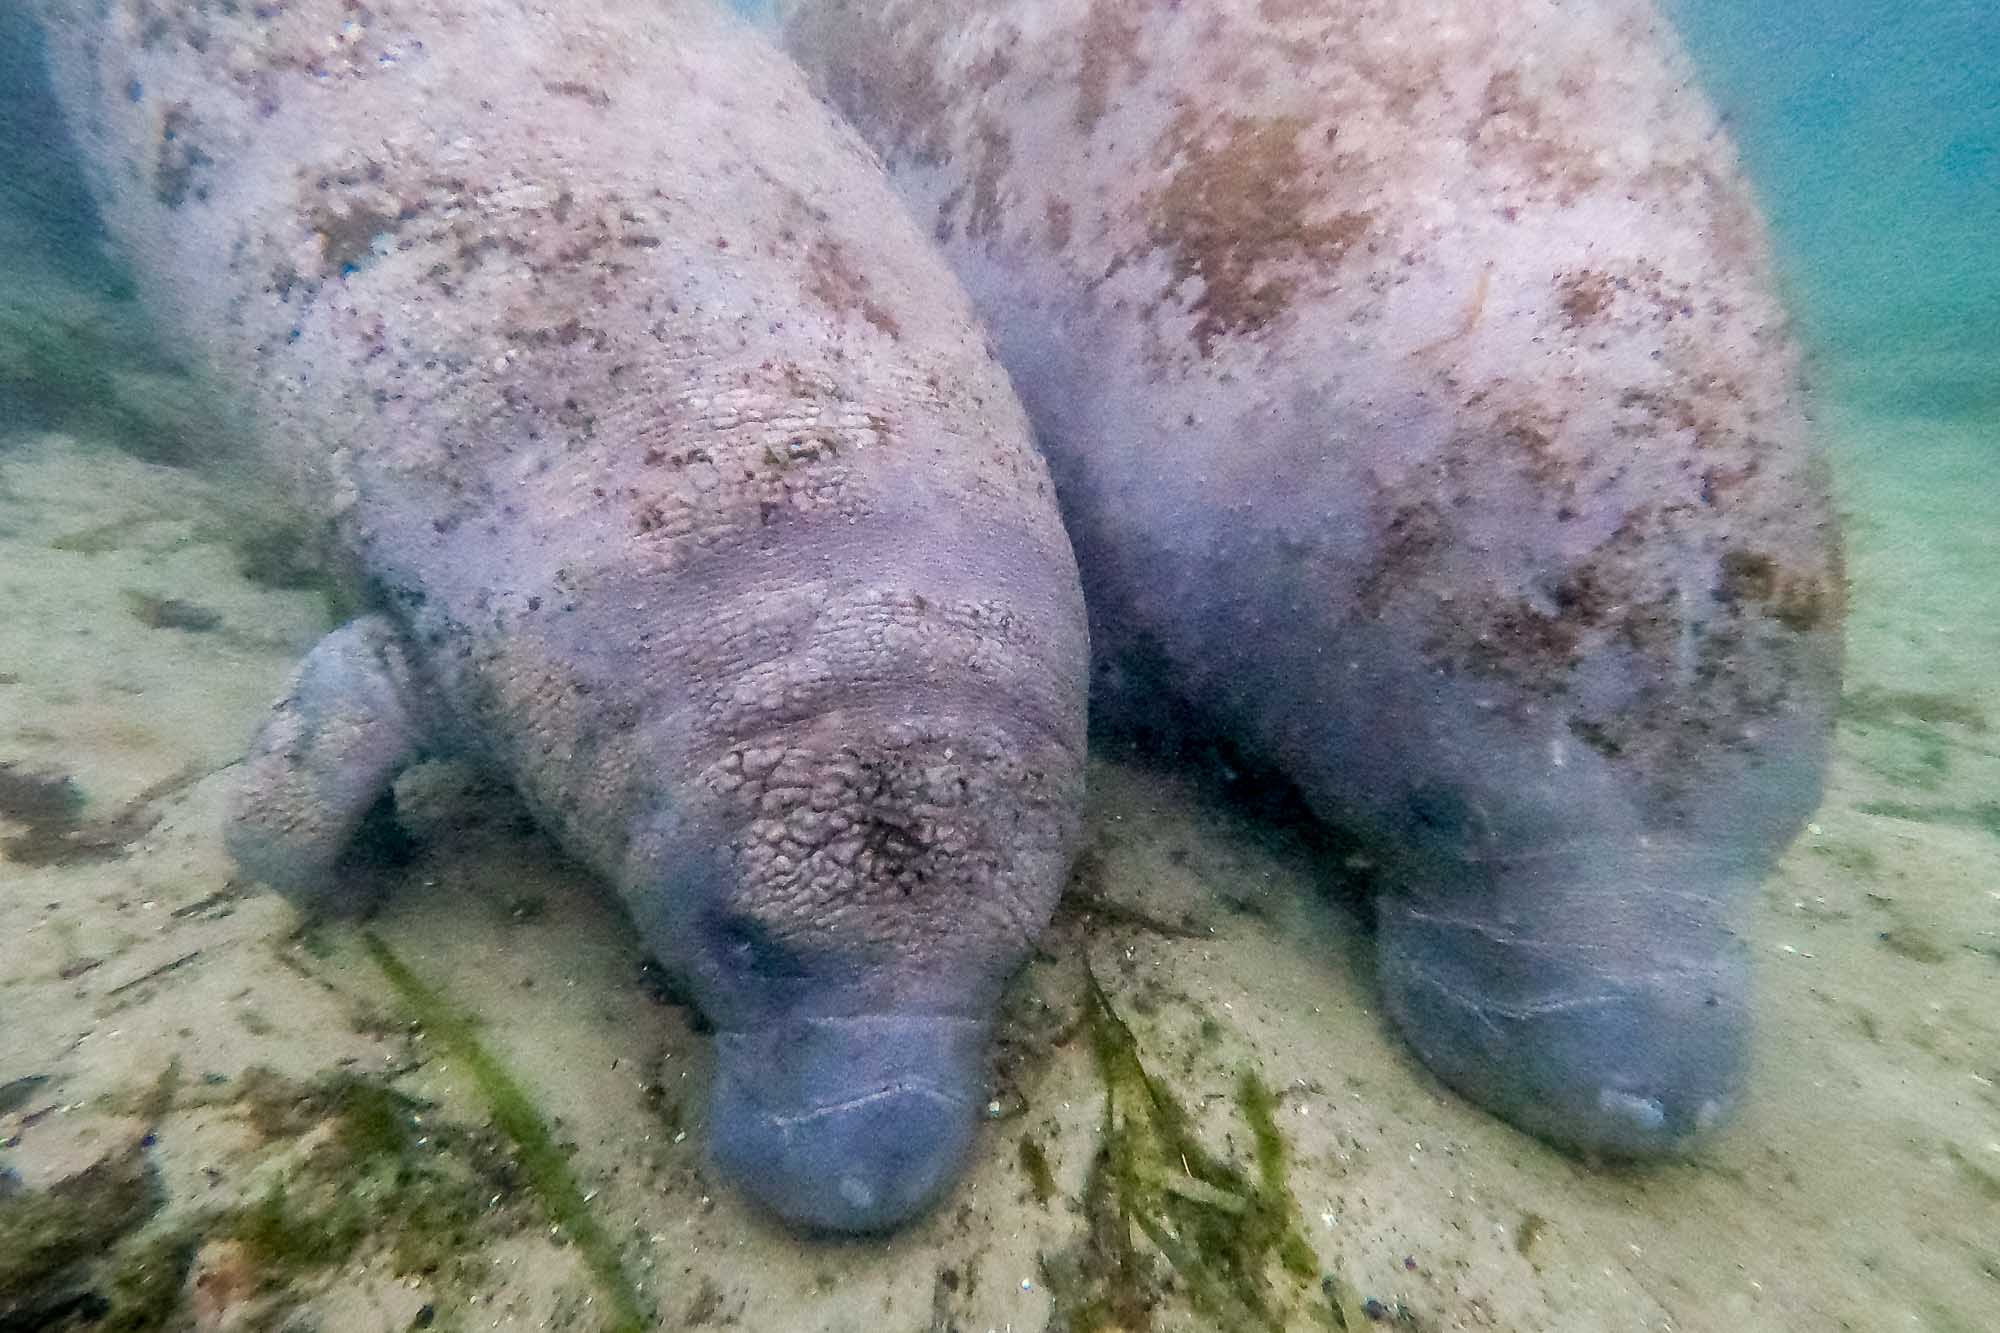 Two manatees in Florida next to each other